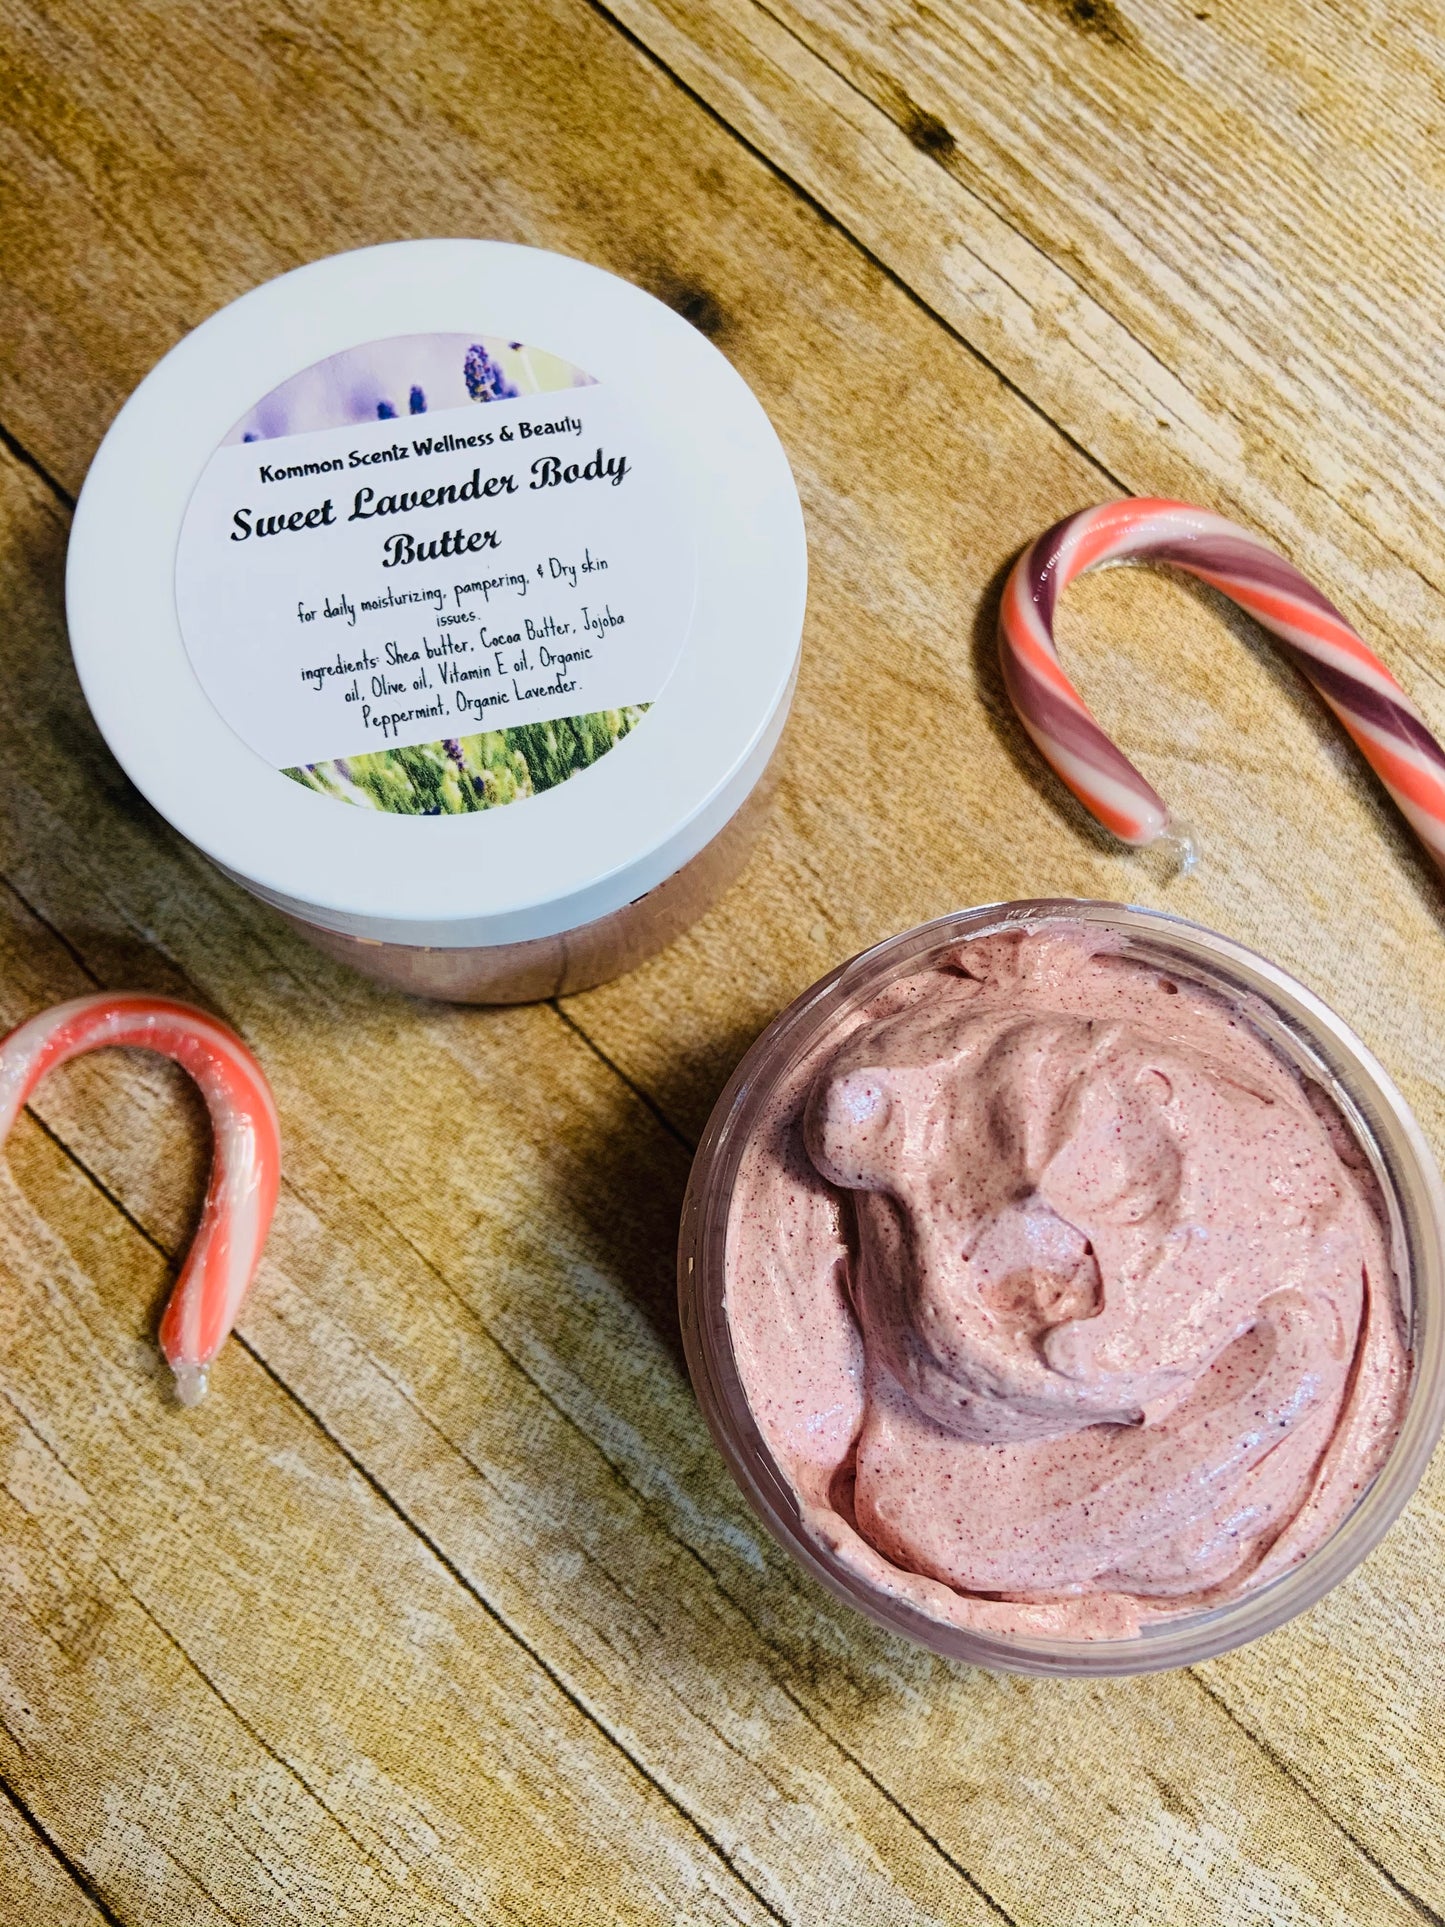 “SWEET LAVENDER BODY BUTTER” with Organic Beetroot